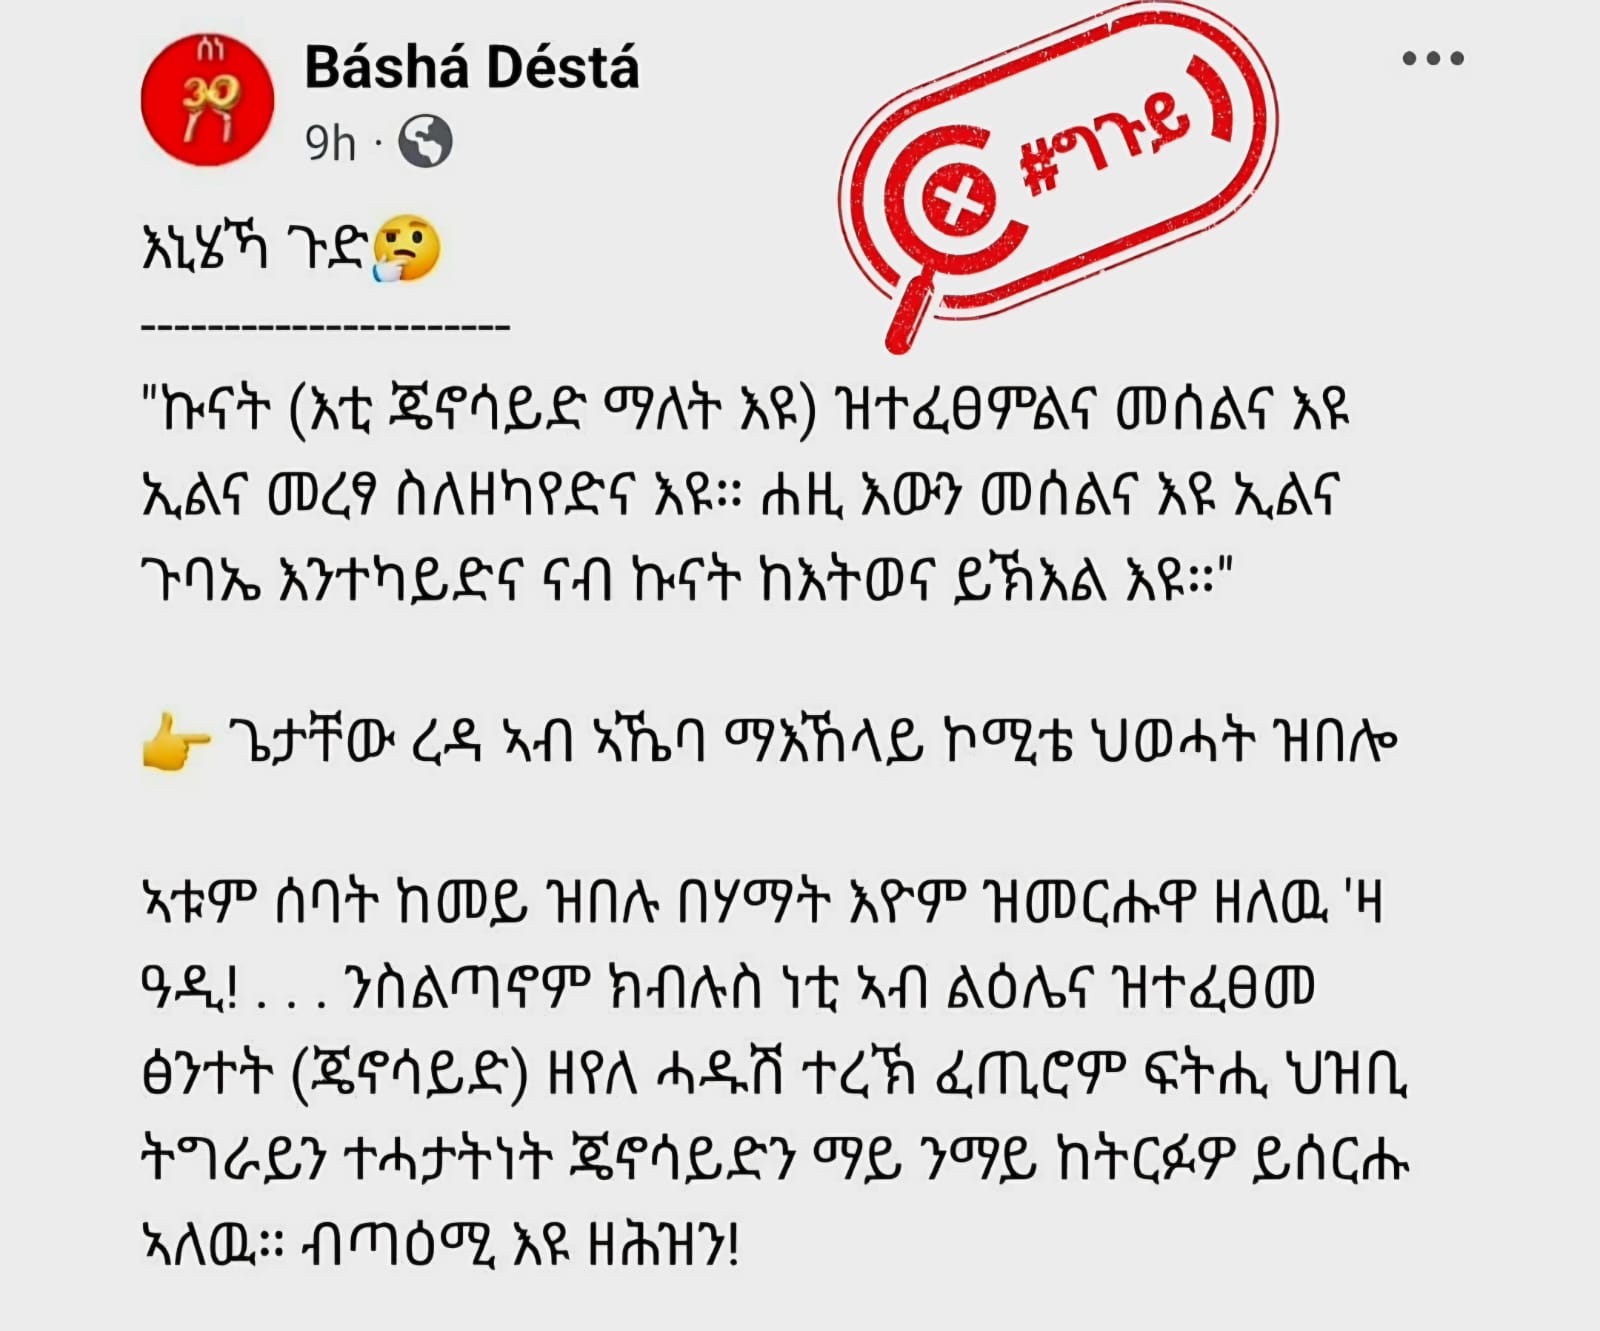 content that shared misinformation about Tigray leadership. 